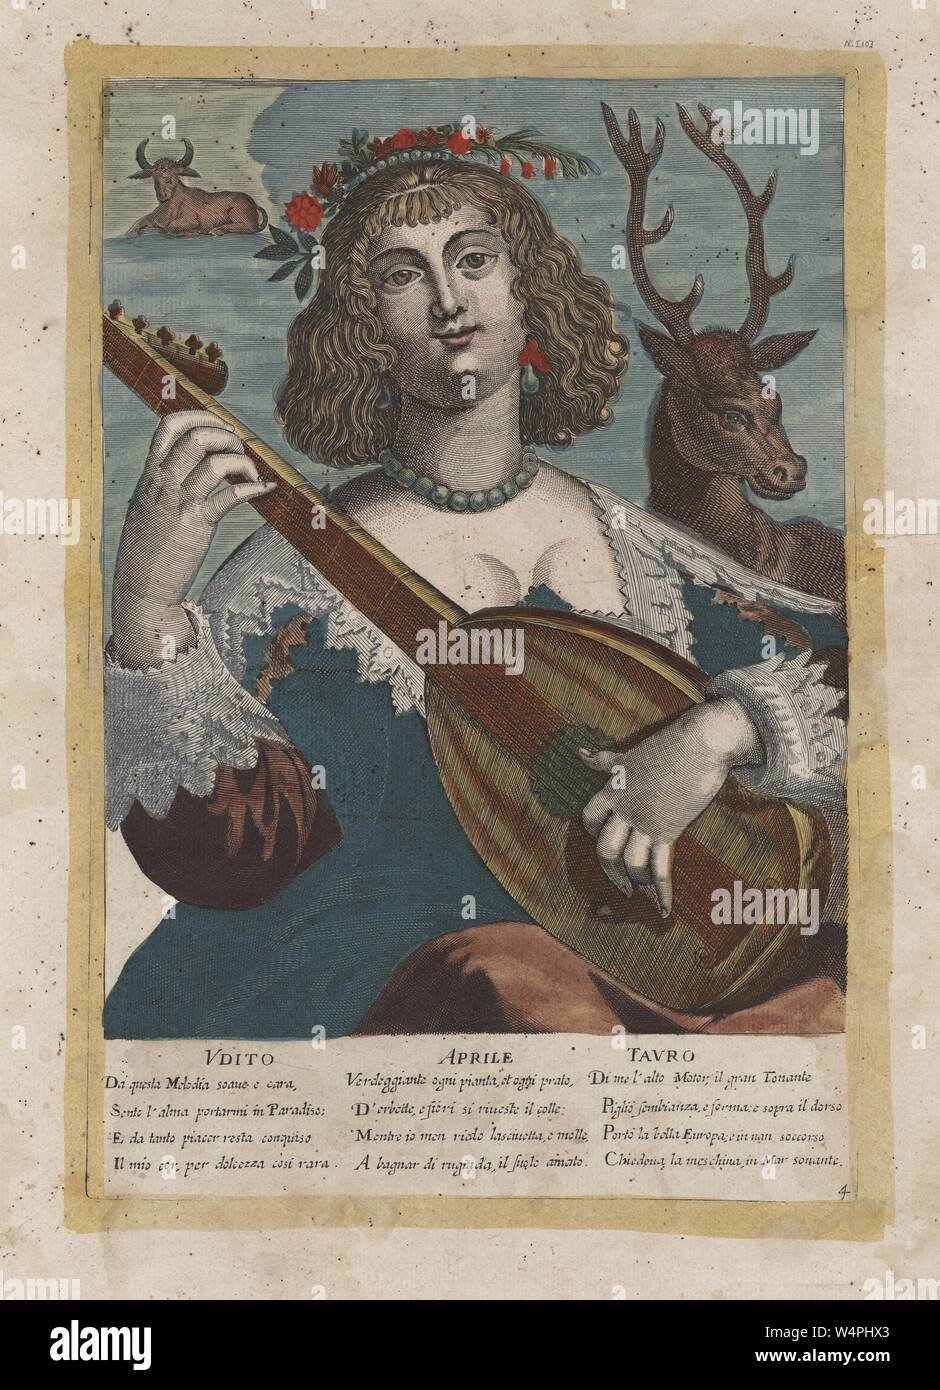 Color engraving, depicting a seated young woman, from the waist up, wearing a blue and red, Renaissance-era dress, and a floral tiara, plucking the strings of a lyre or small guitar, with a bull in the upper left background, a deer in the background at right, and with three columns of Italian text beneath the image, with the title captions 'Udito, Aprile, Tauro' or 'Hearing, April, Taurus', 1649. From the New York Public Library. () Stock Photo